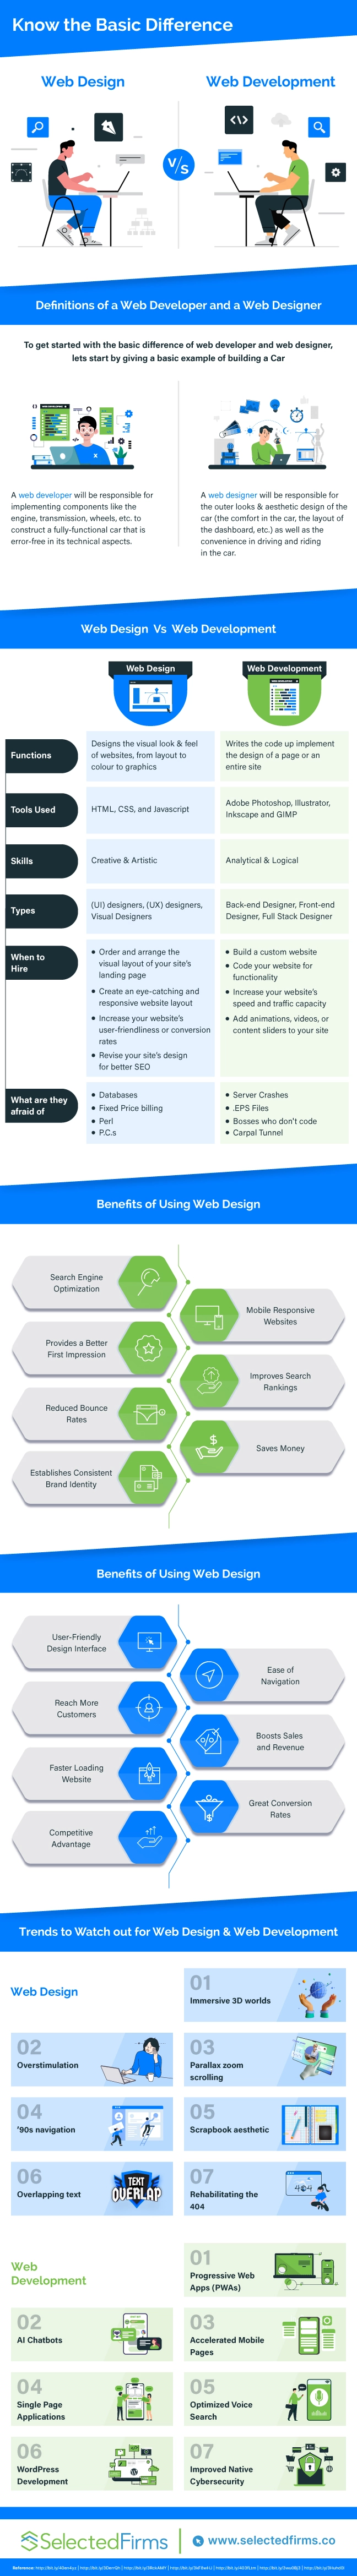 Web Design Vs Web Development  Basic Difference & Upcoming Trends Infographic